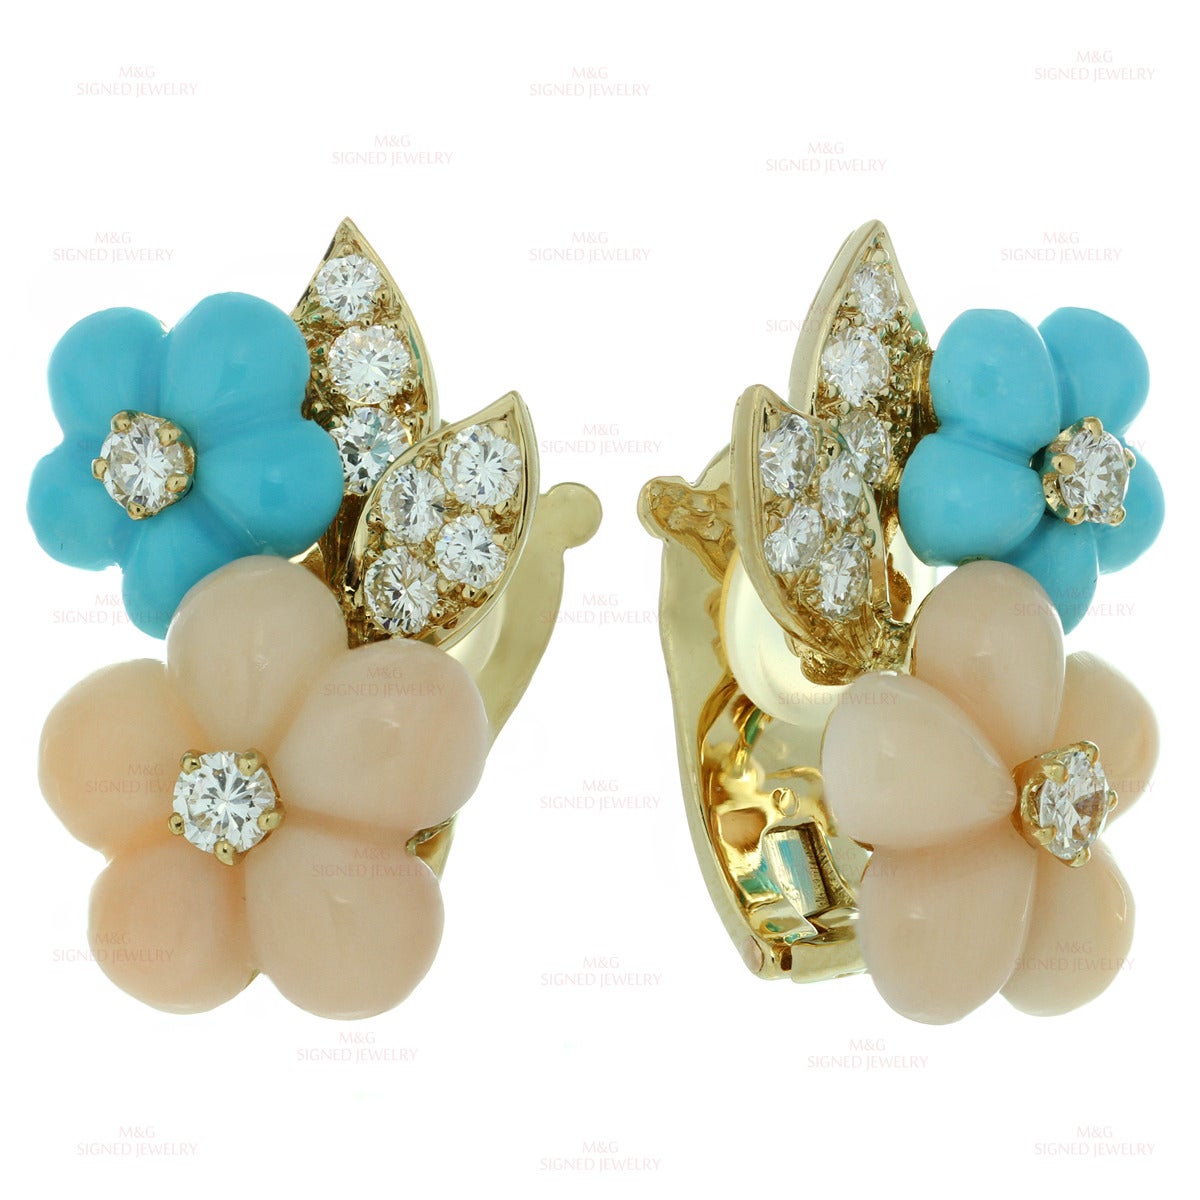 These elegant Van Cleef & Arpels clip-on earrings are crafted in 18k yellow gold and feature a two-flower design carved out of Arizona sleeping beauty turquoise and angel skin coral and accented with round brilliant-cut D-E VVS1-VVS2 diamonds of an